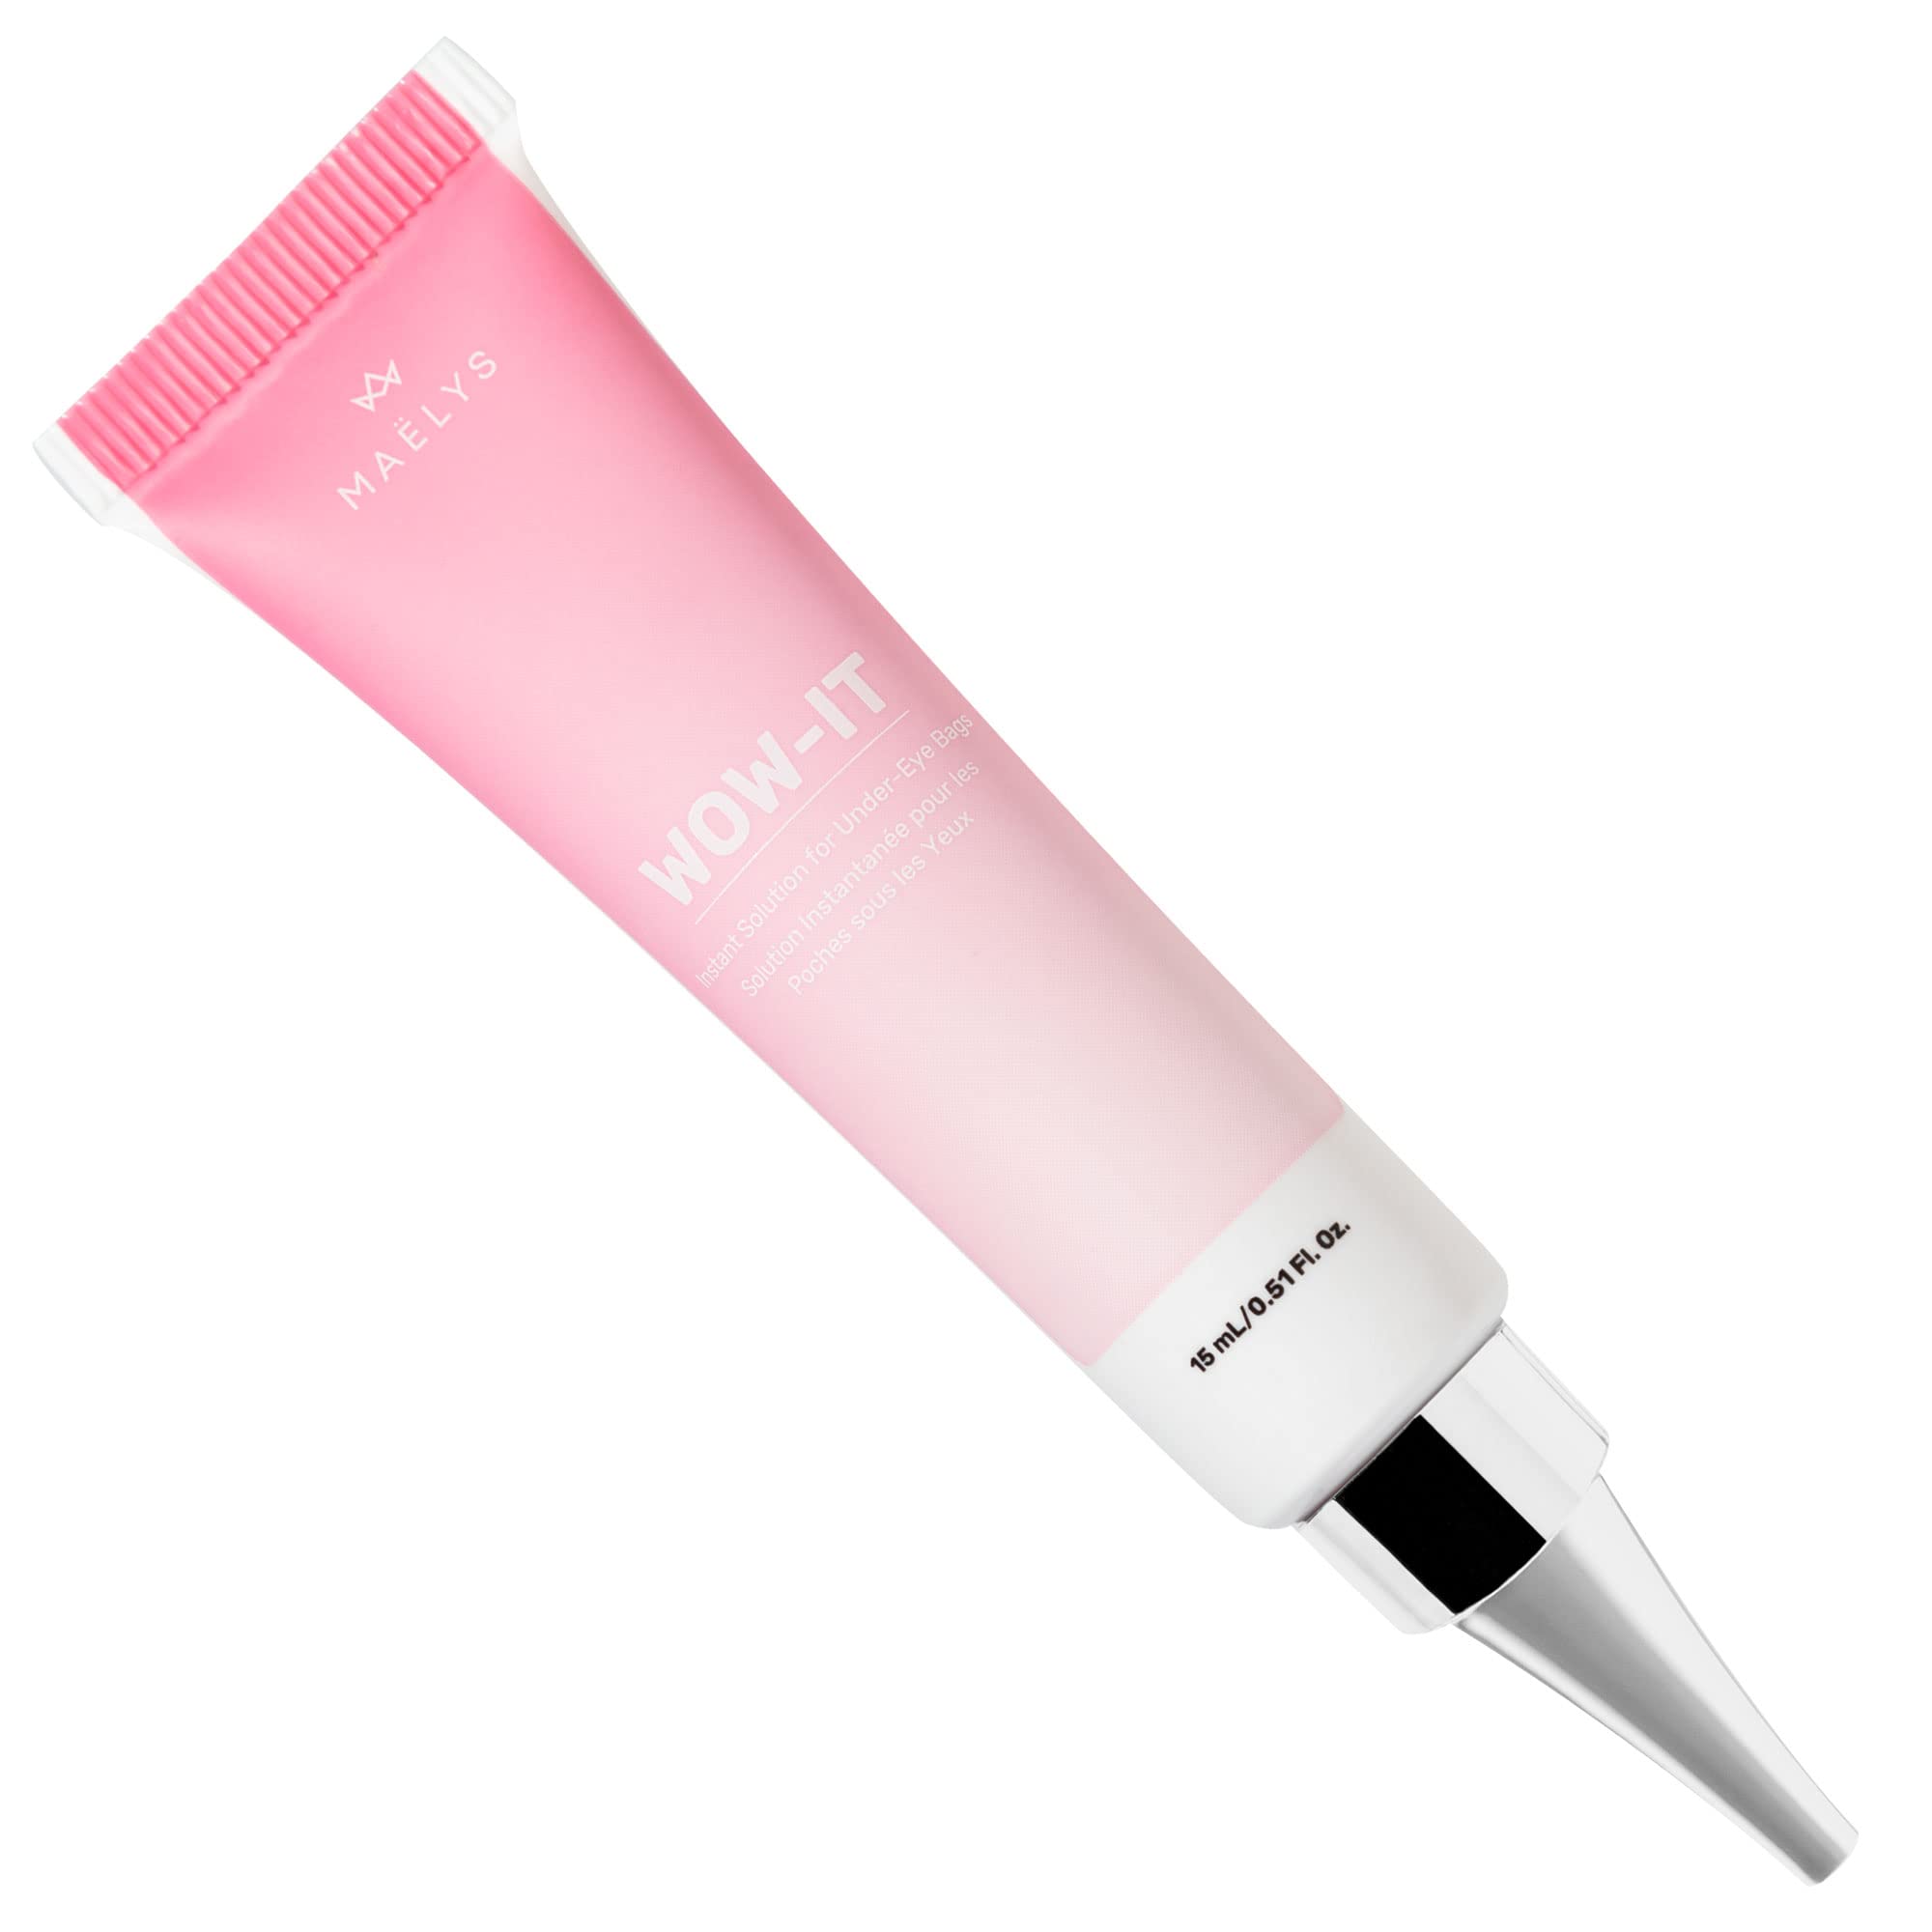 MAËLYS WOW-IT Instant Under Eye Cream - Helps to Instantly Reduce The Puffy Eye Look and Moisturize Under-Eye Skin For A Firm Look